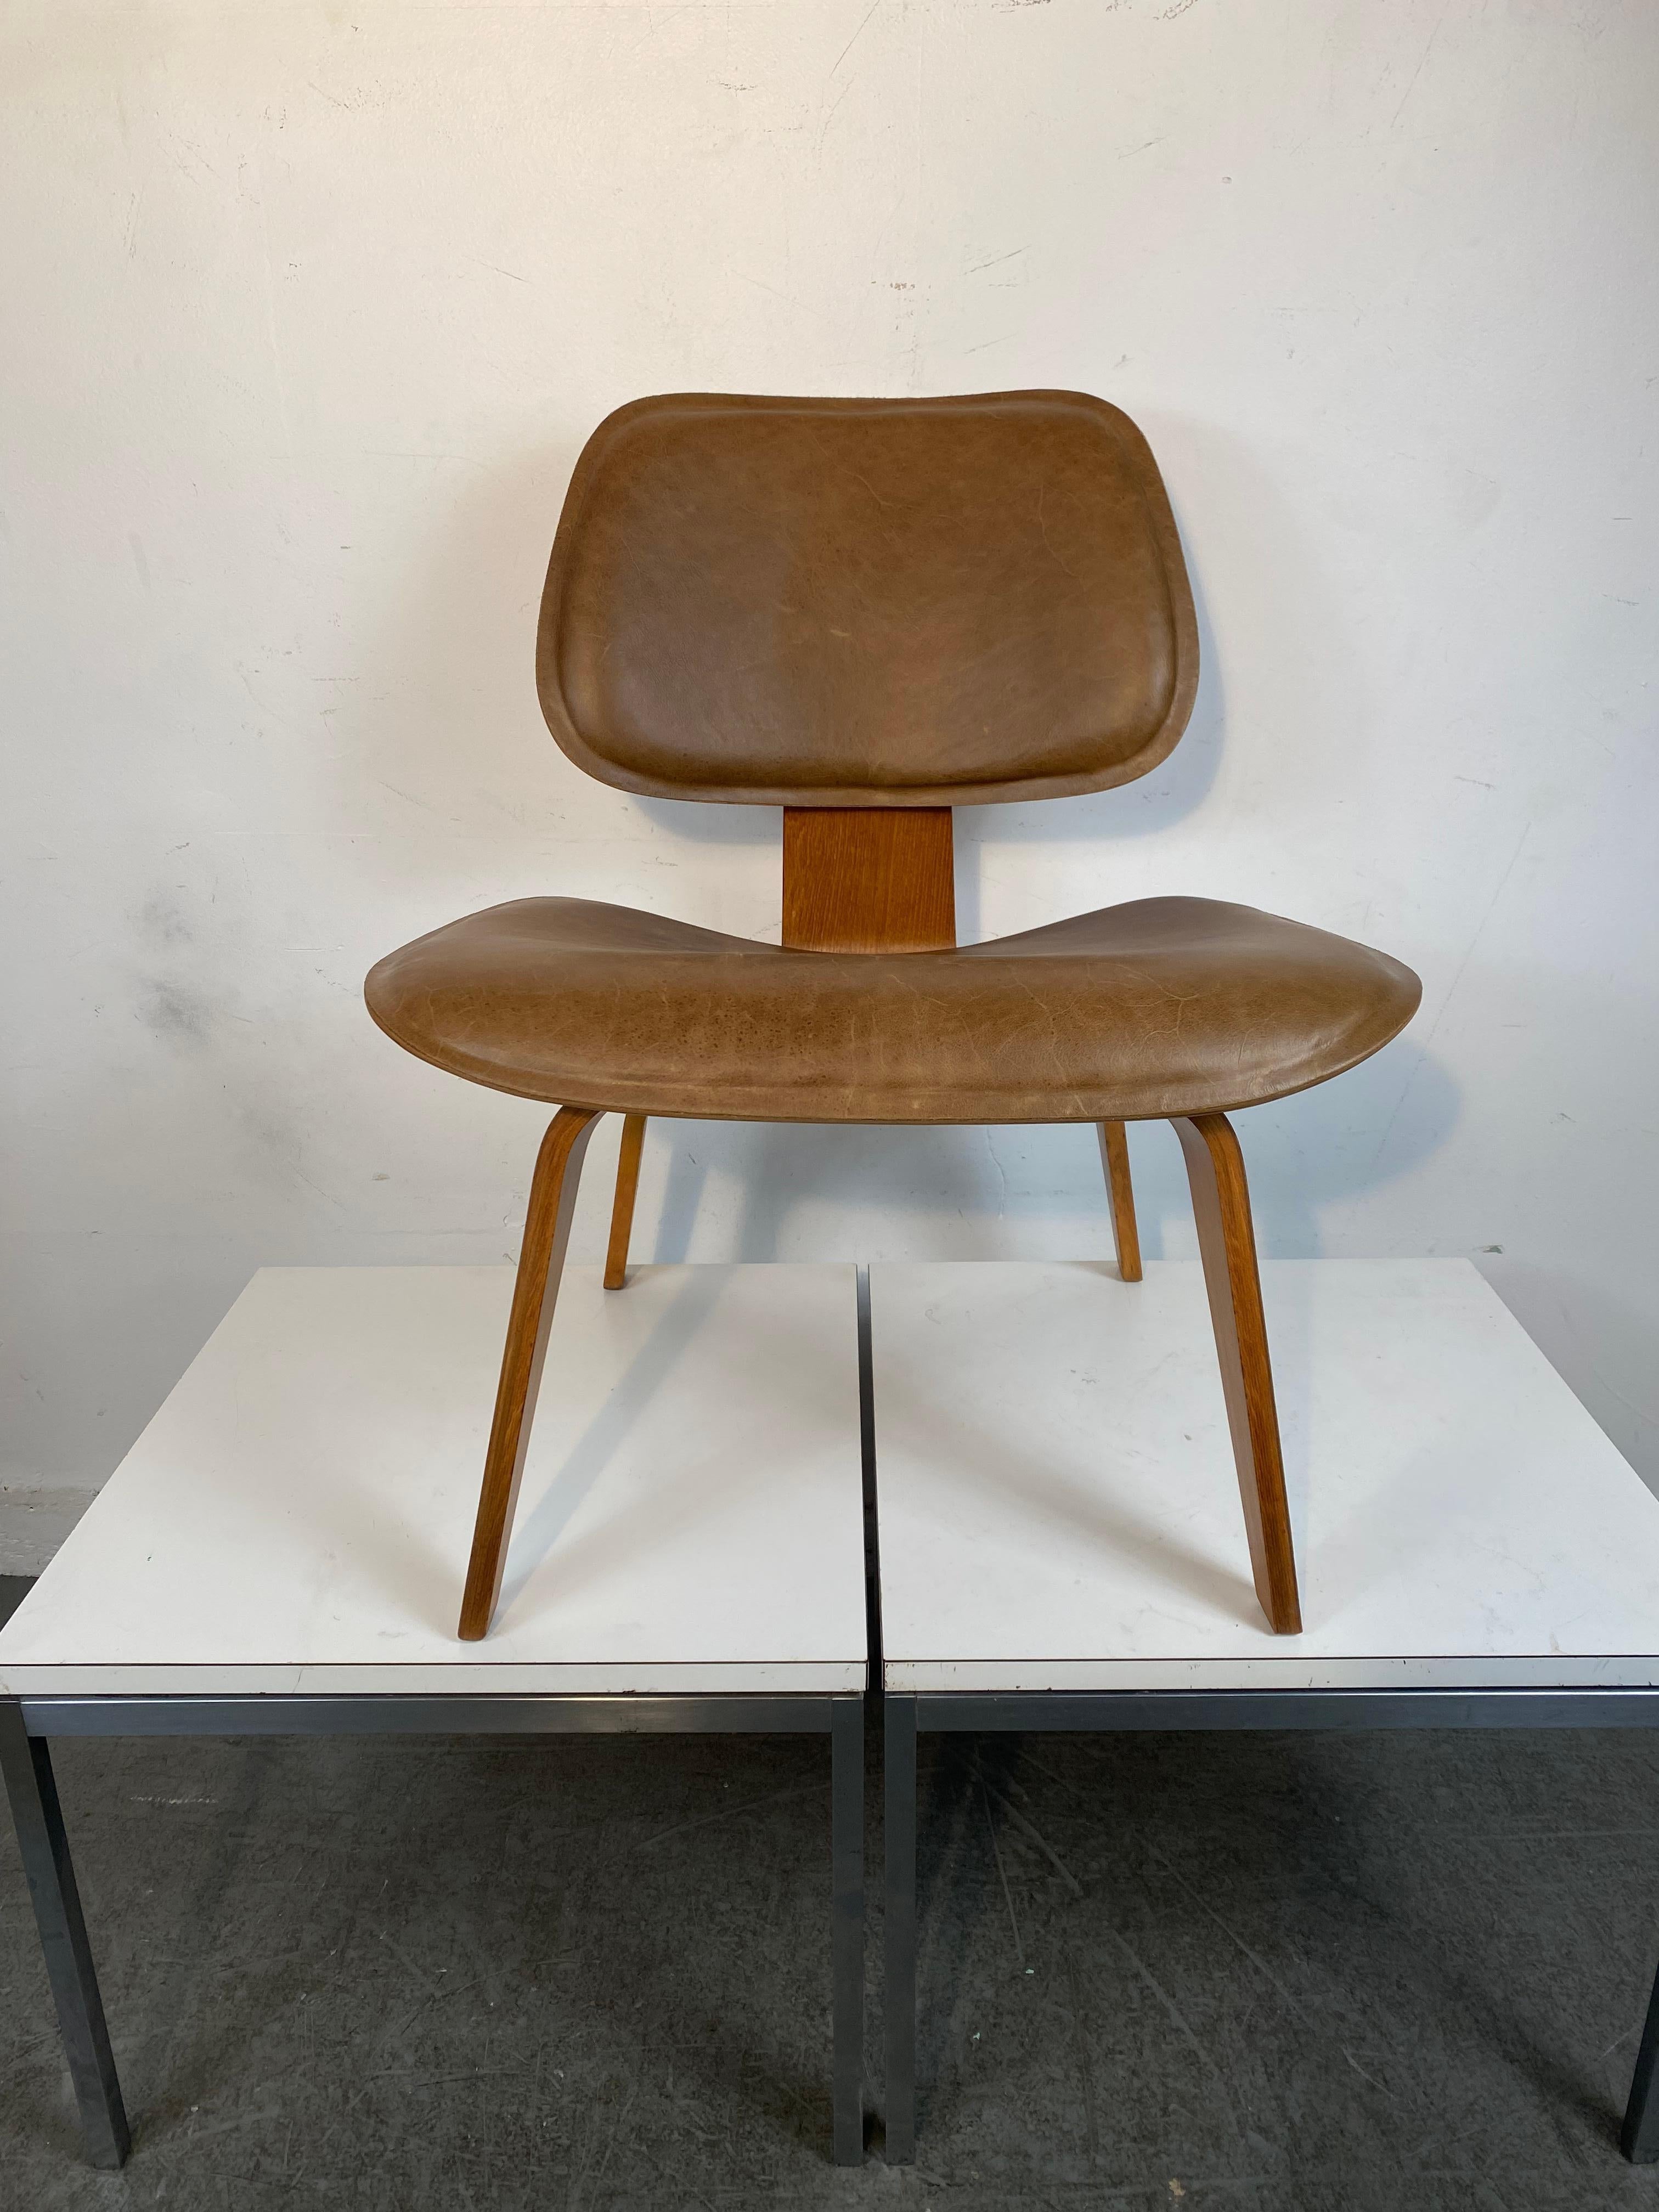 Charles Eames L C W (LOUNGE CHAIR) Leather seat and back, Modernist Herman Miller 1